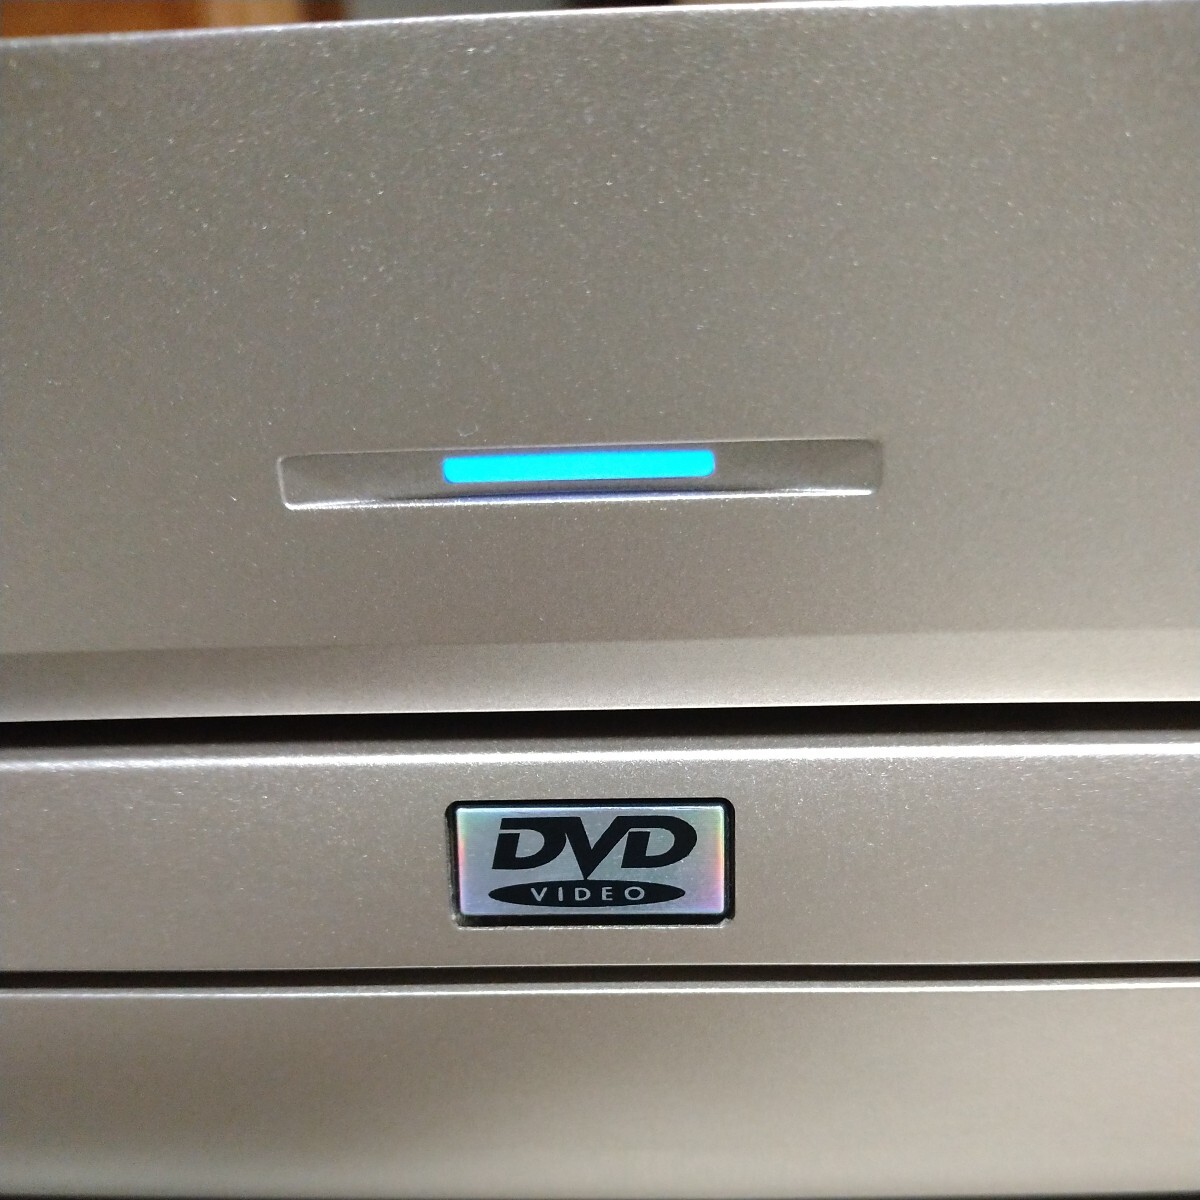  anonymity delivery Pioneer laser disk player DVL-919